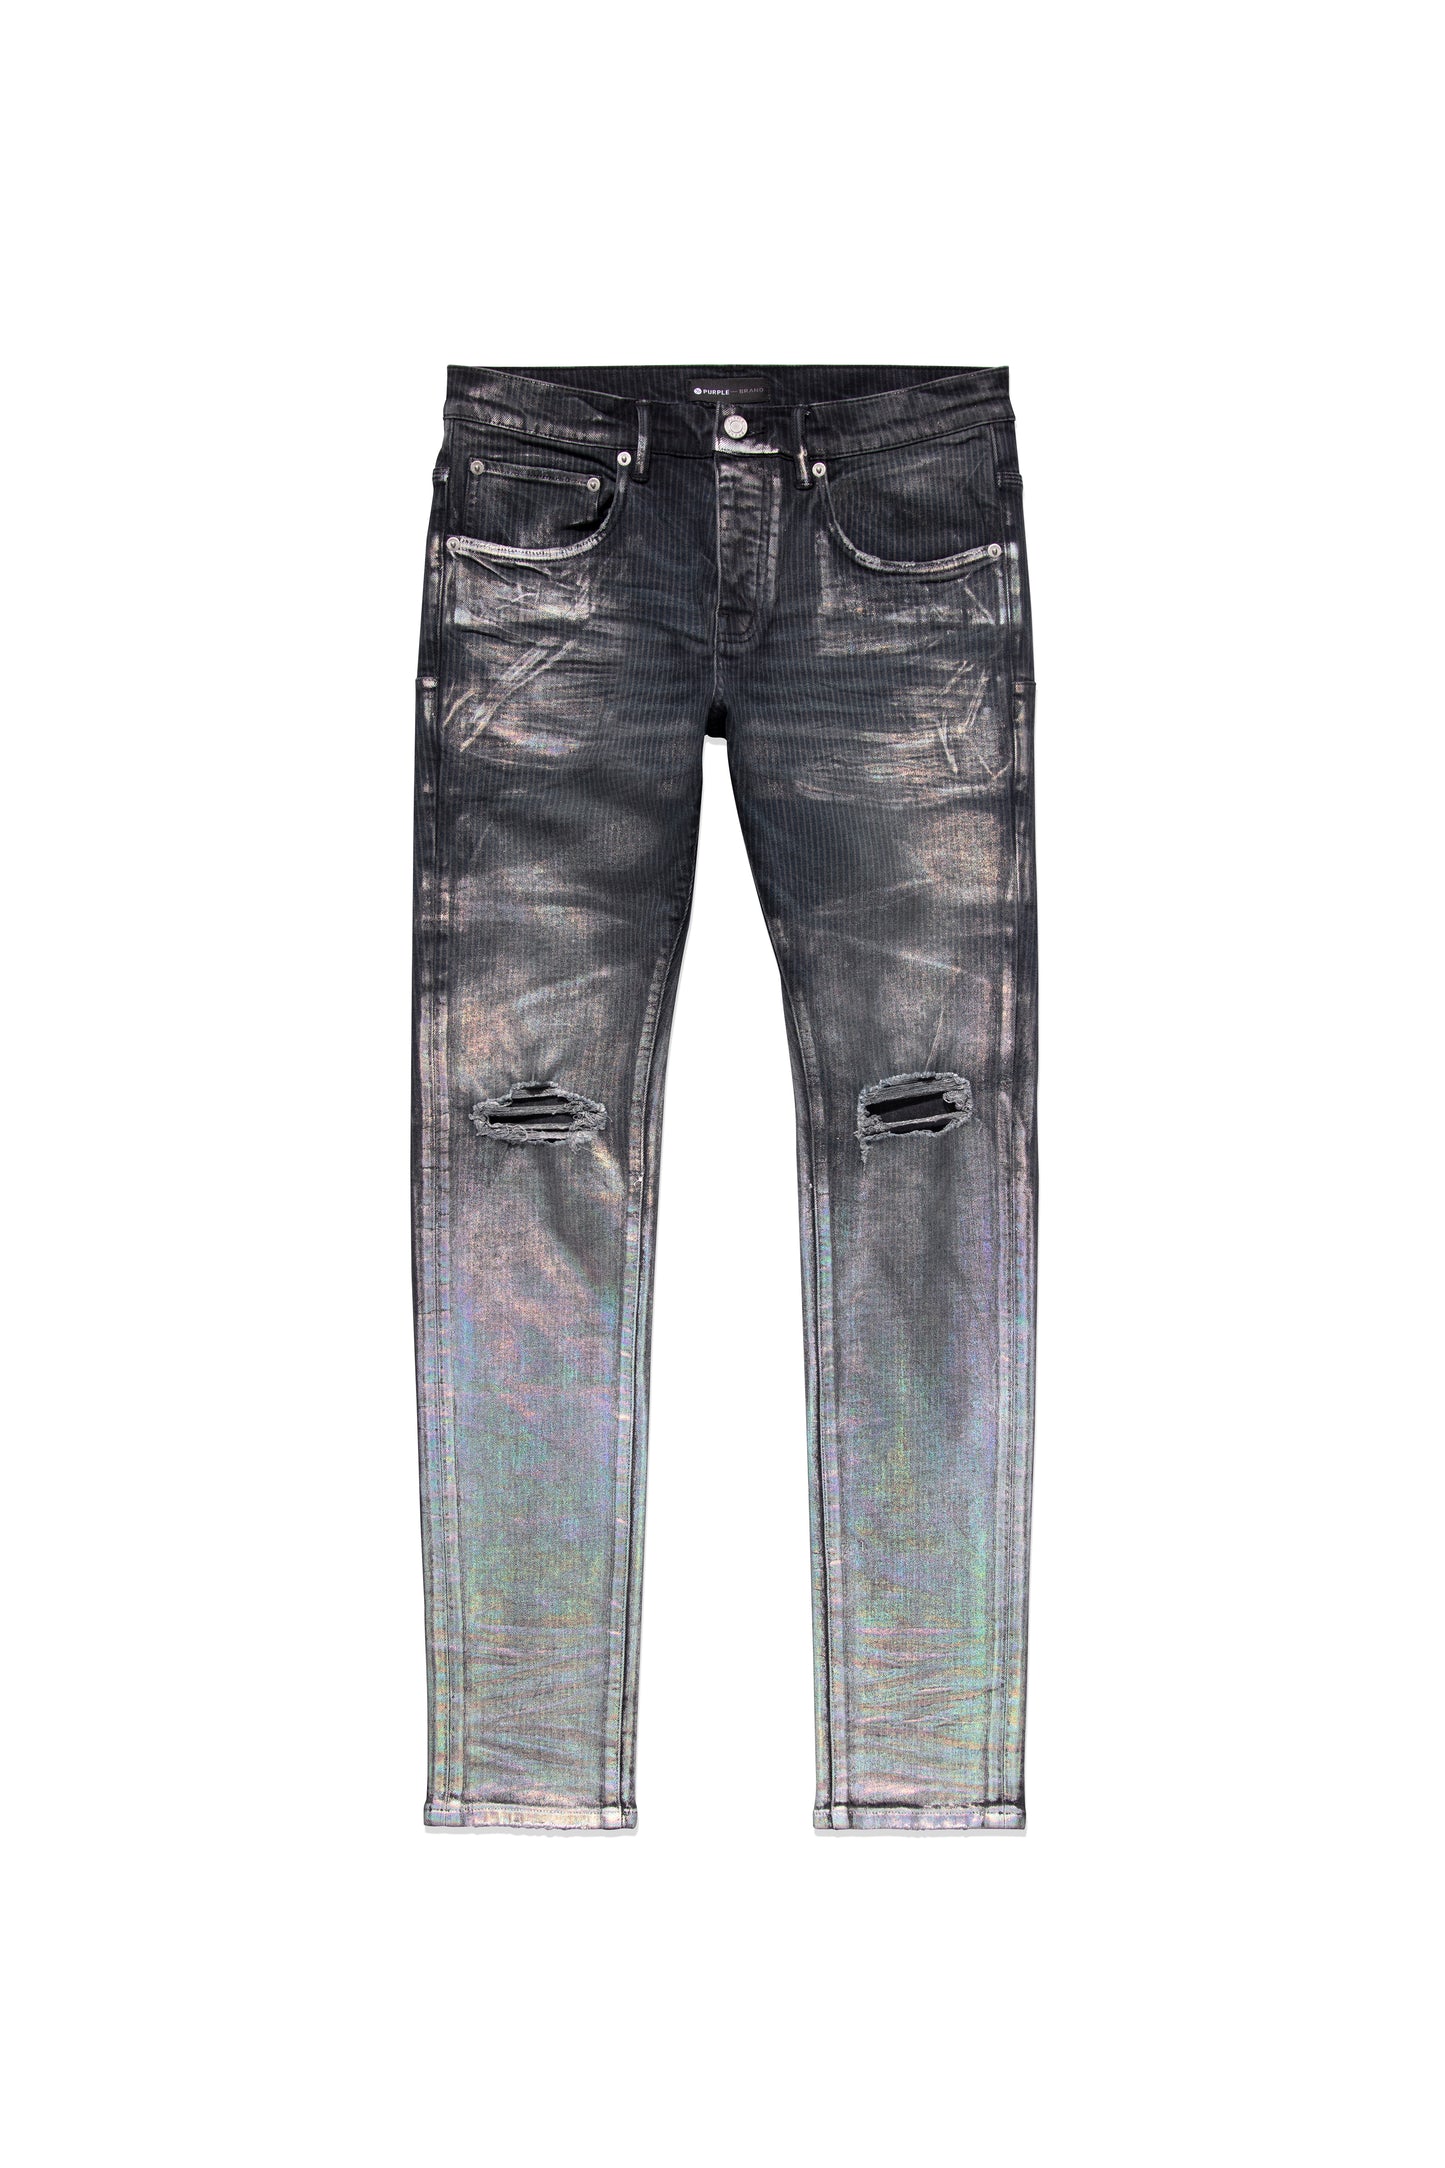 P001 LOW RISE SKINNY JEAN - Anthracite Hickory Overdye W Iridescent Foil